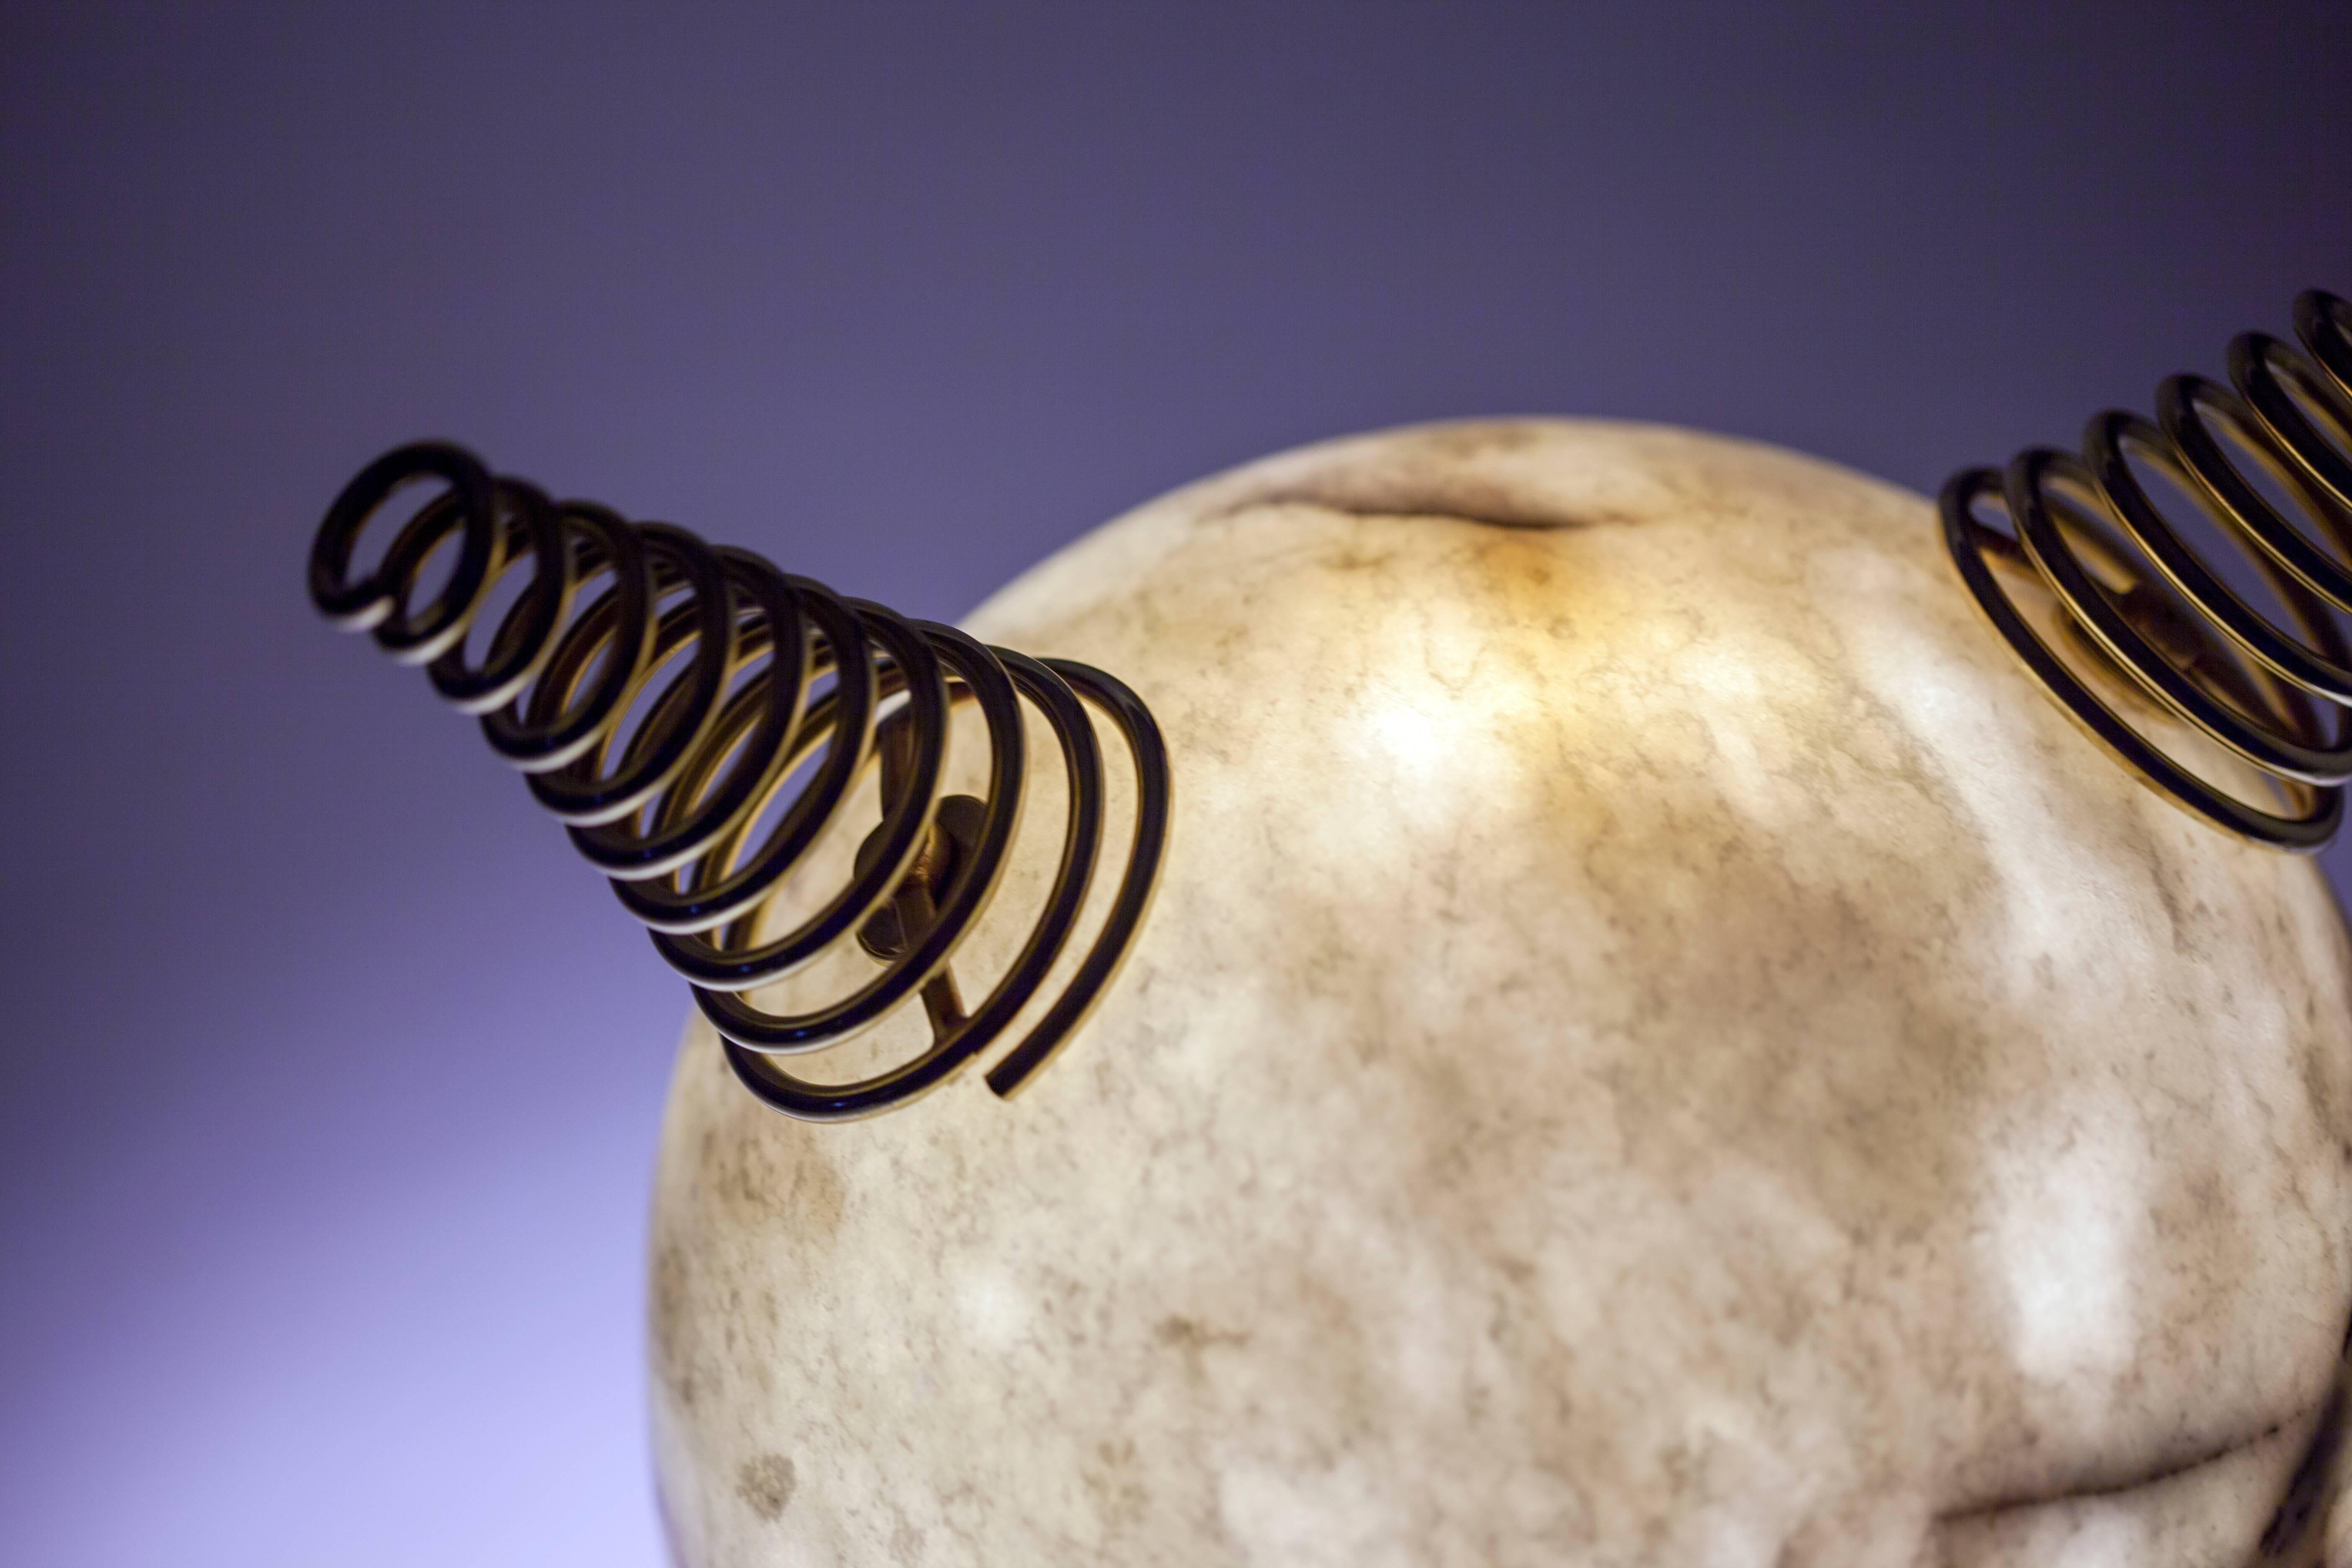 Min Lilla Anime is the new version of the Min Lilla Viking lamp. Horns are replaced with the swivel metal strings resembling the hair of the Japanese anime characters. Veins of the Leylak marble gives out a purplish hue.

Materials: Leylak Marble